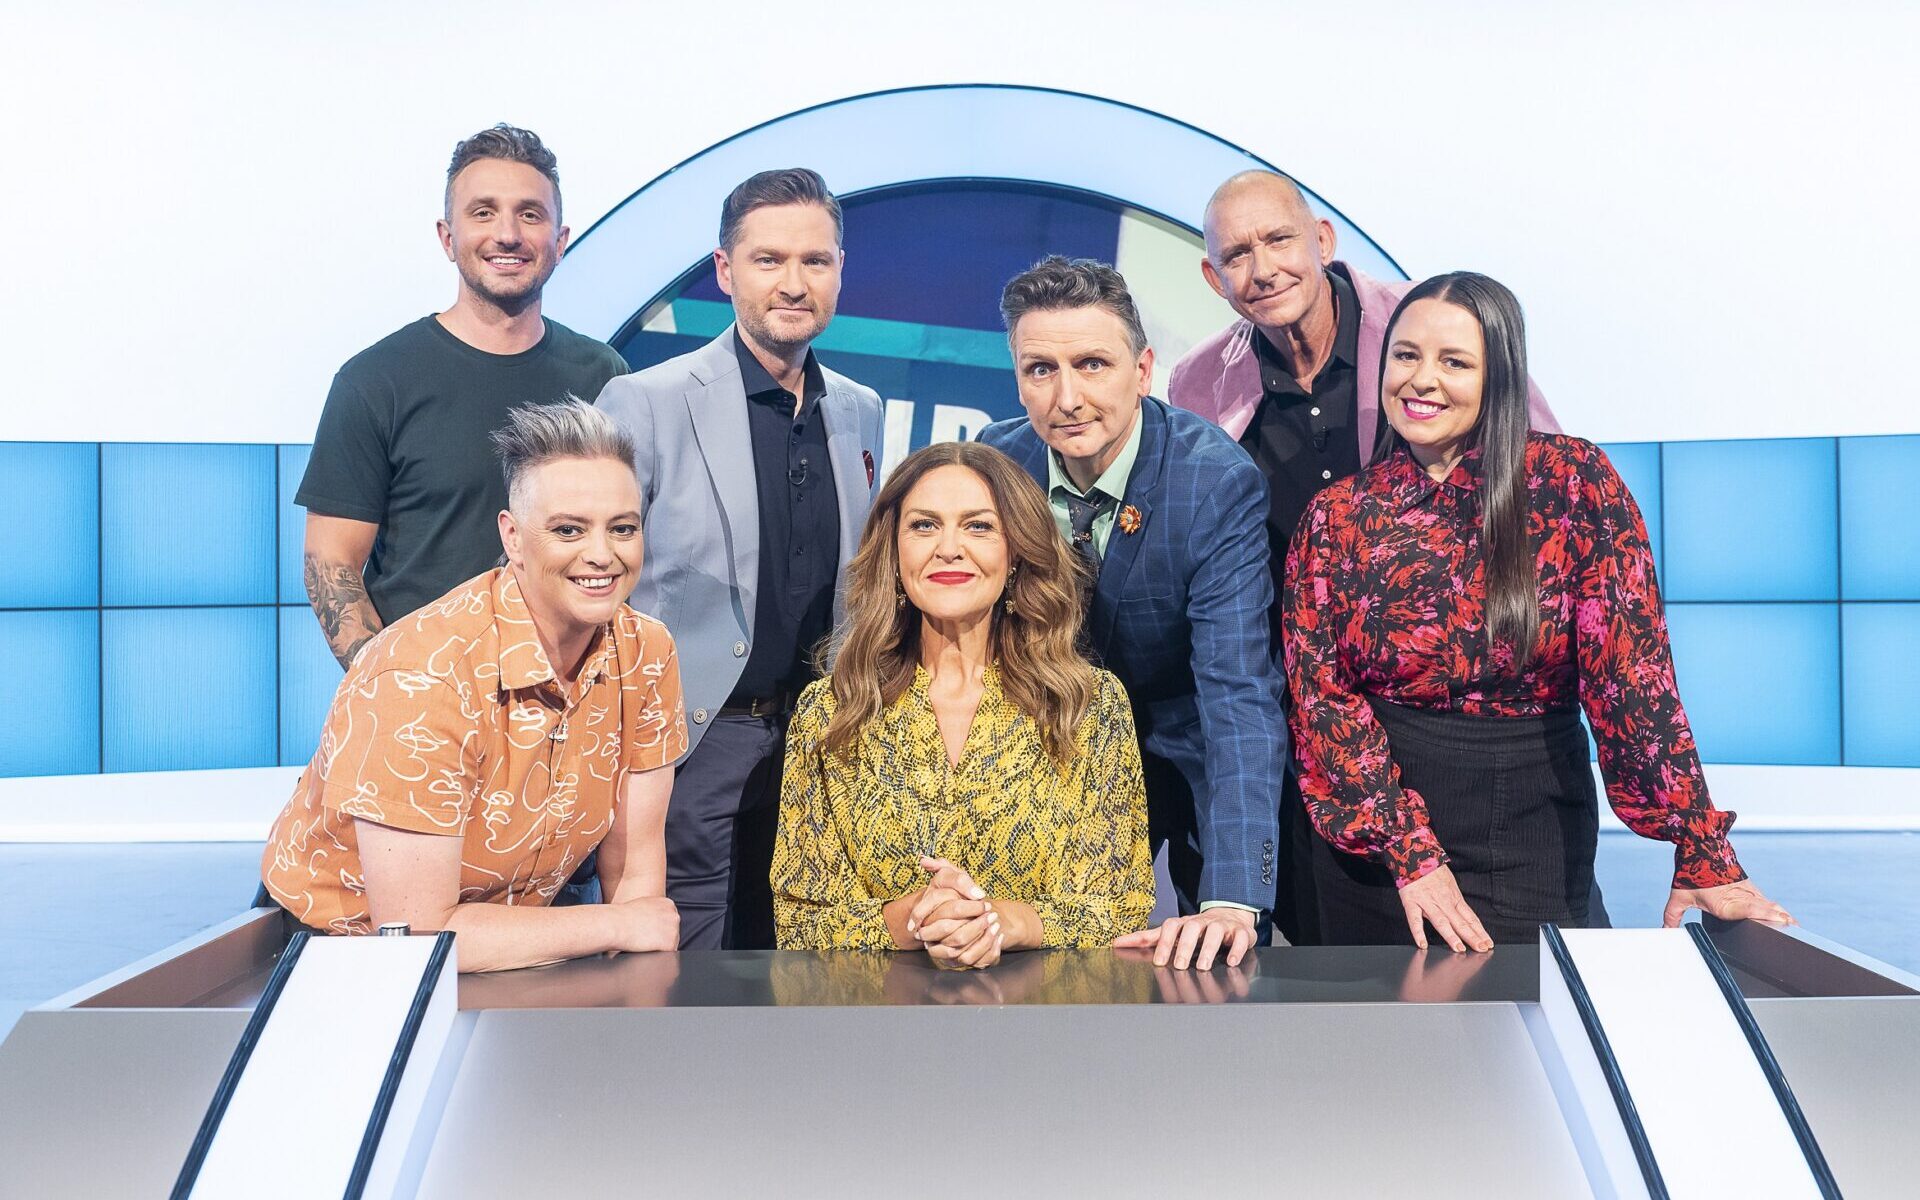 Would I Lie to You? Australia - Tommy Little, Geraldine Hickey, Charlie Pickering, Chrissie Swan. Frank Woodley, Pete Rowsthorn and Myf Warhurst